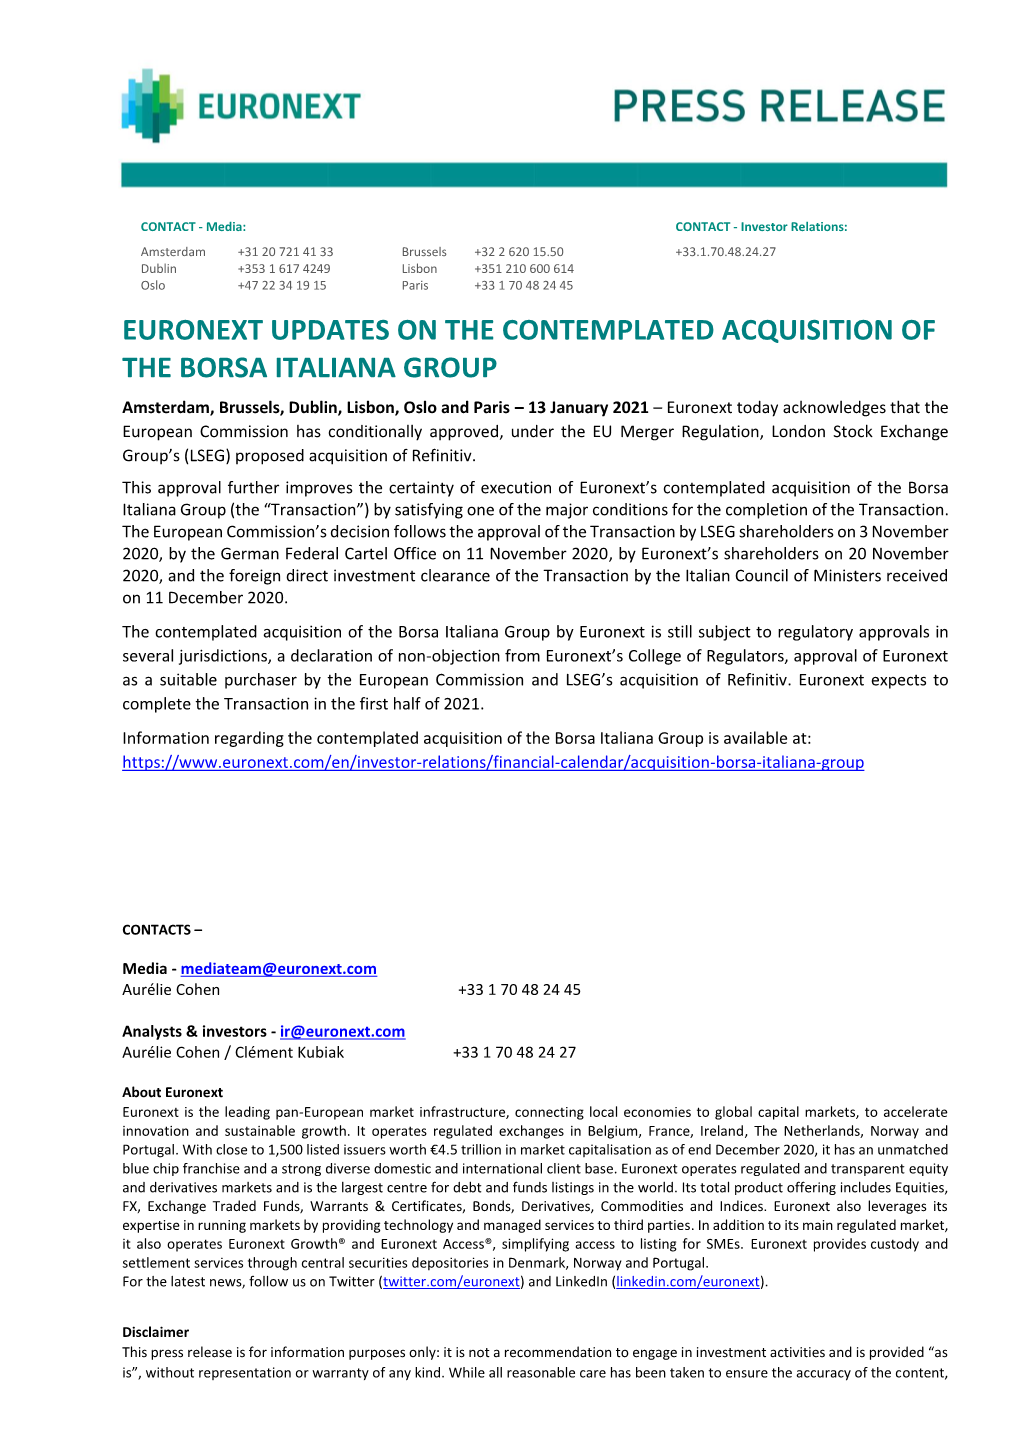 Euronext Updates on the Contemplated Acquisition of the Borsa Italiana Group